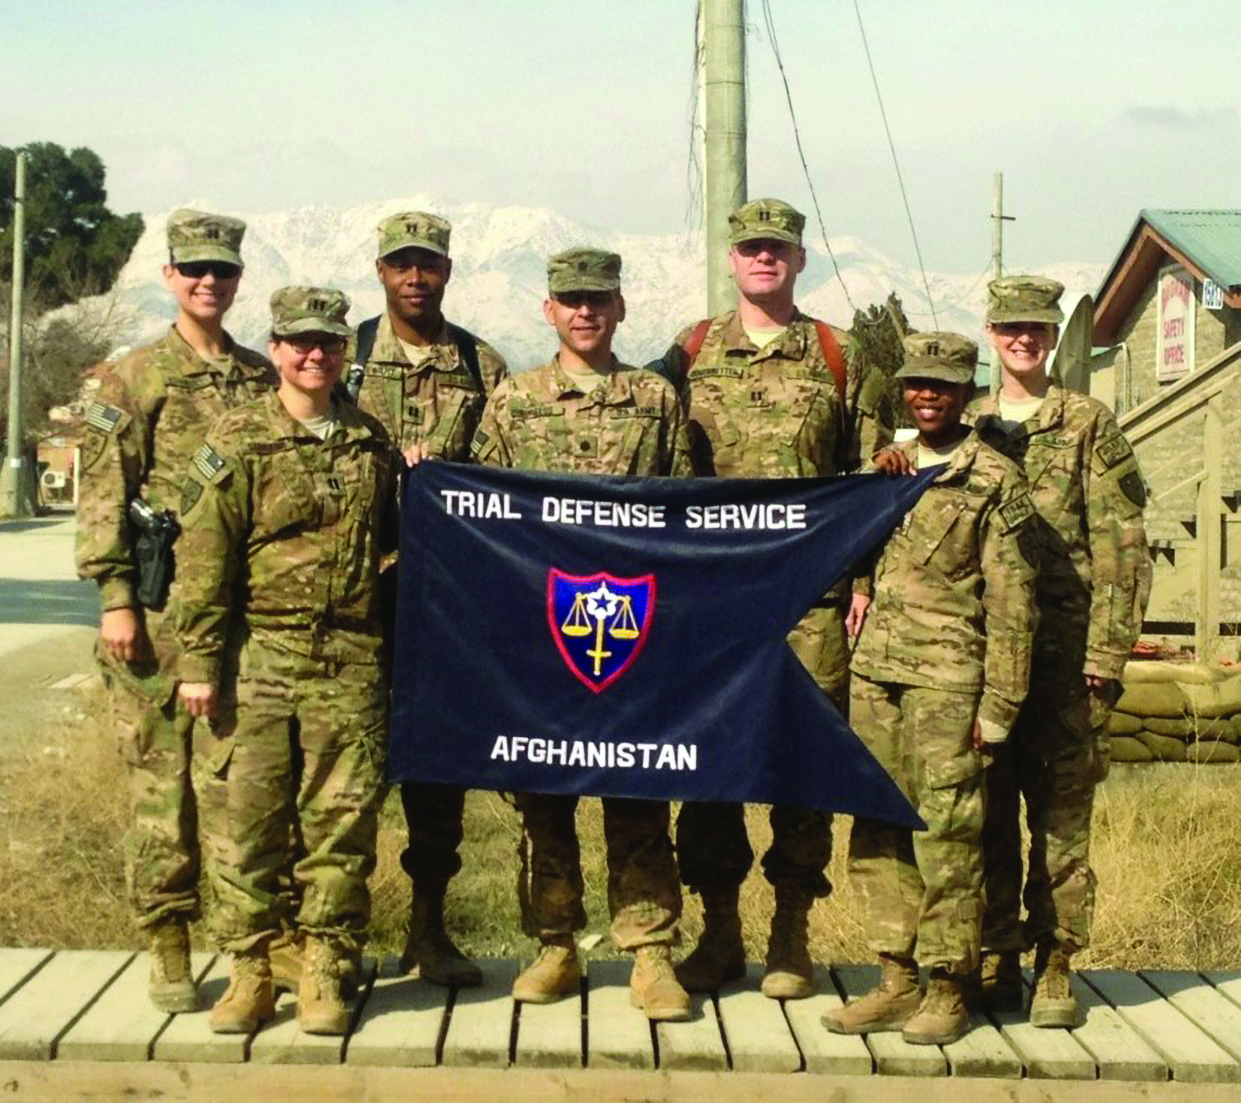 On 4 February 2014, members of Trial Defense
          Service (TDS–Region IX), gathered outside of the
          Bagram TDS office at Bagram Airfield for a weeklong regional training event. This was the last Region
          IX training conducted at Bagram Airfield. Shortly
          after the training, CPT Keith Stewart and CPT Wendy
          Schrank defended a Soldier at a fully-contested
          court-martial (panel case) at the Bagram Court,
          securing a full acquittal in the process. Pictured left
          to right: CPT Katherine Flowers (DC, Camp Phoenix
          Field Office), CPT Wendy Schrank (DC, Kuwait Field
          Office), CPT Keith Stewart (DC, Bagram Field Office),
          LTC Christopher Burgess (RDC, Bagram Field Office),
          CPT Jon Schoenwetter (SDC, Kuwait Field Office),
          CPT Jihan Walker (SDC, Kandahar Field Office), and
          MAJ Mary Meek (SDC, Bagram Field Office). 